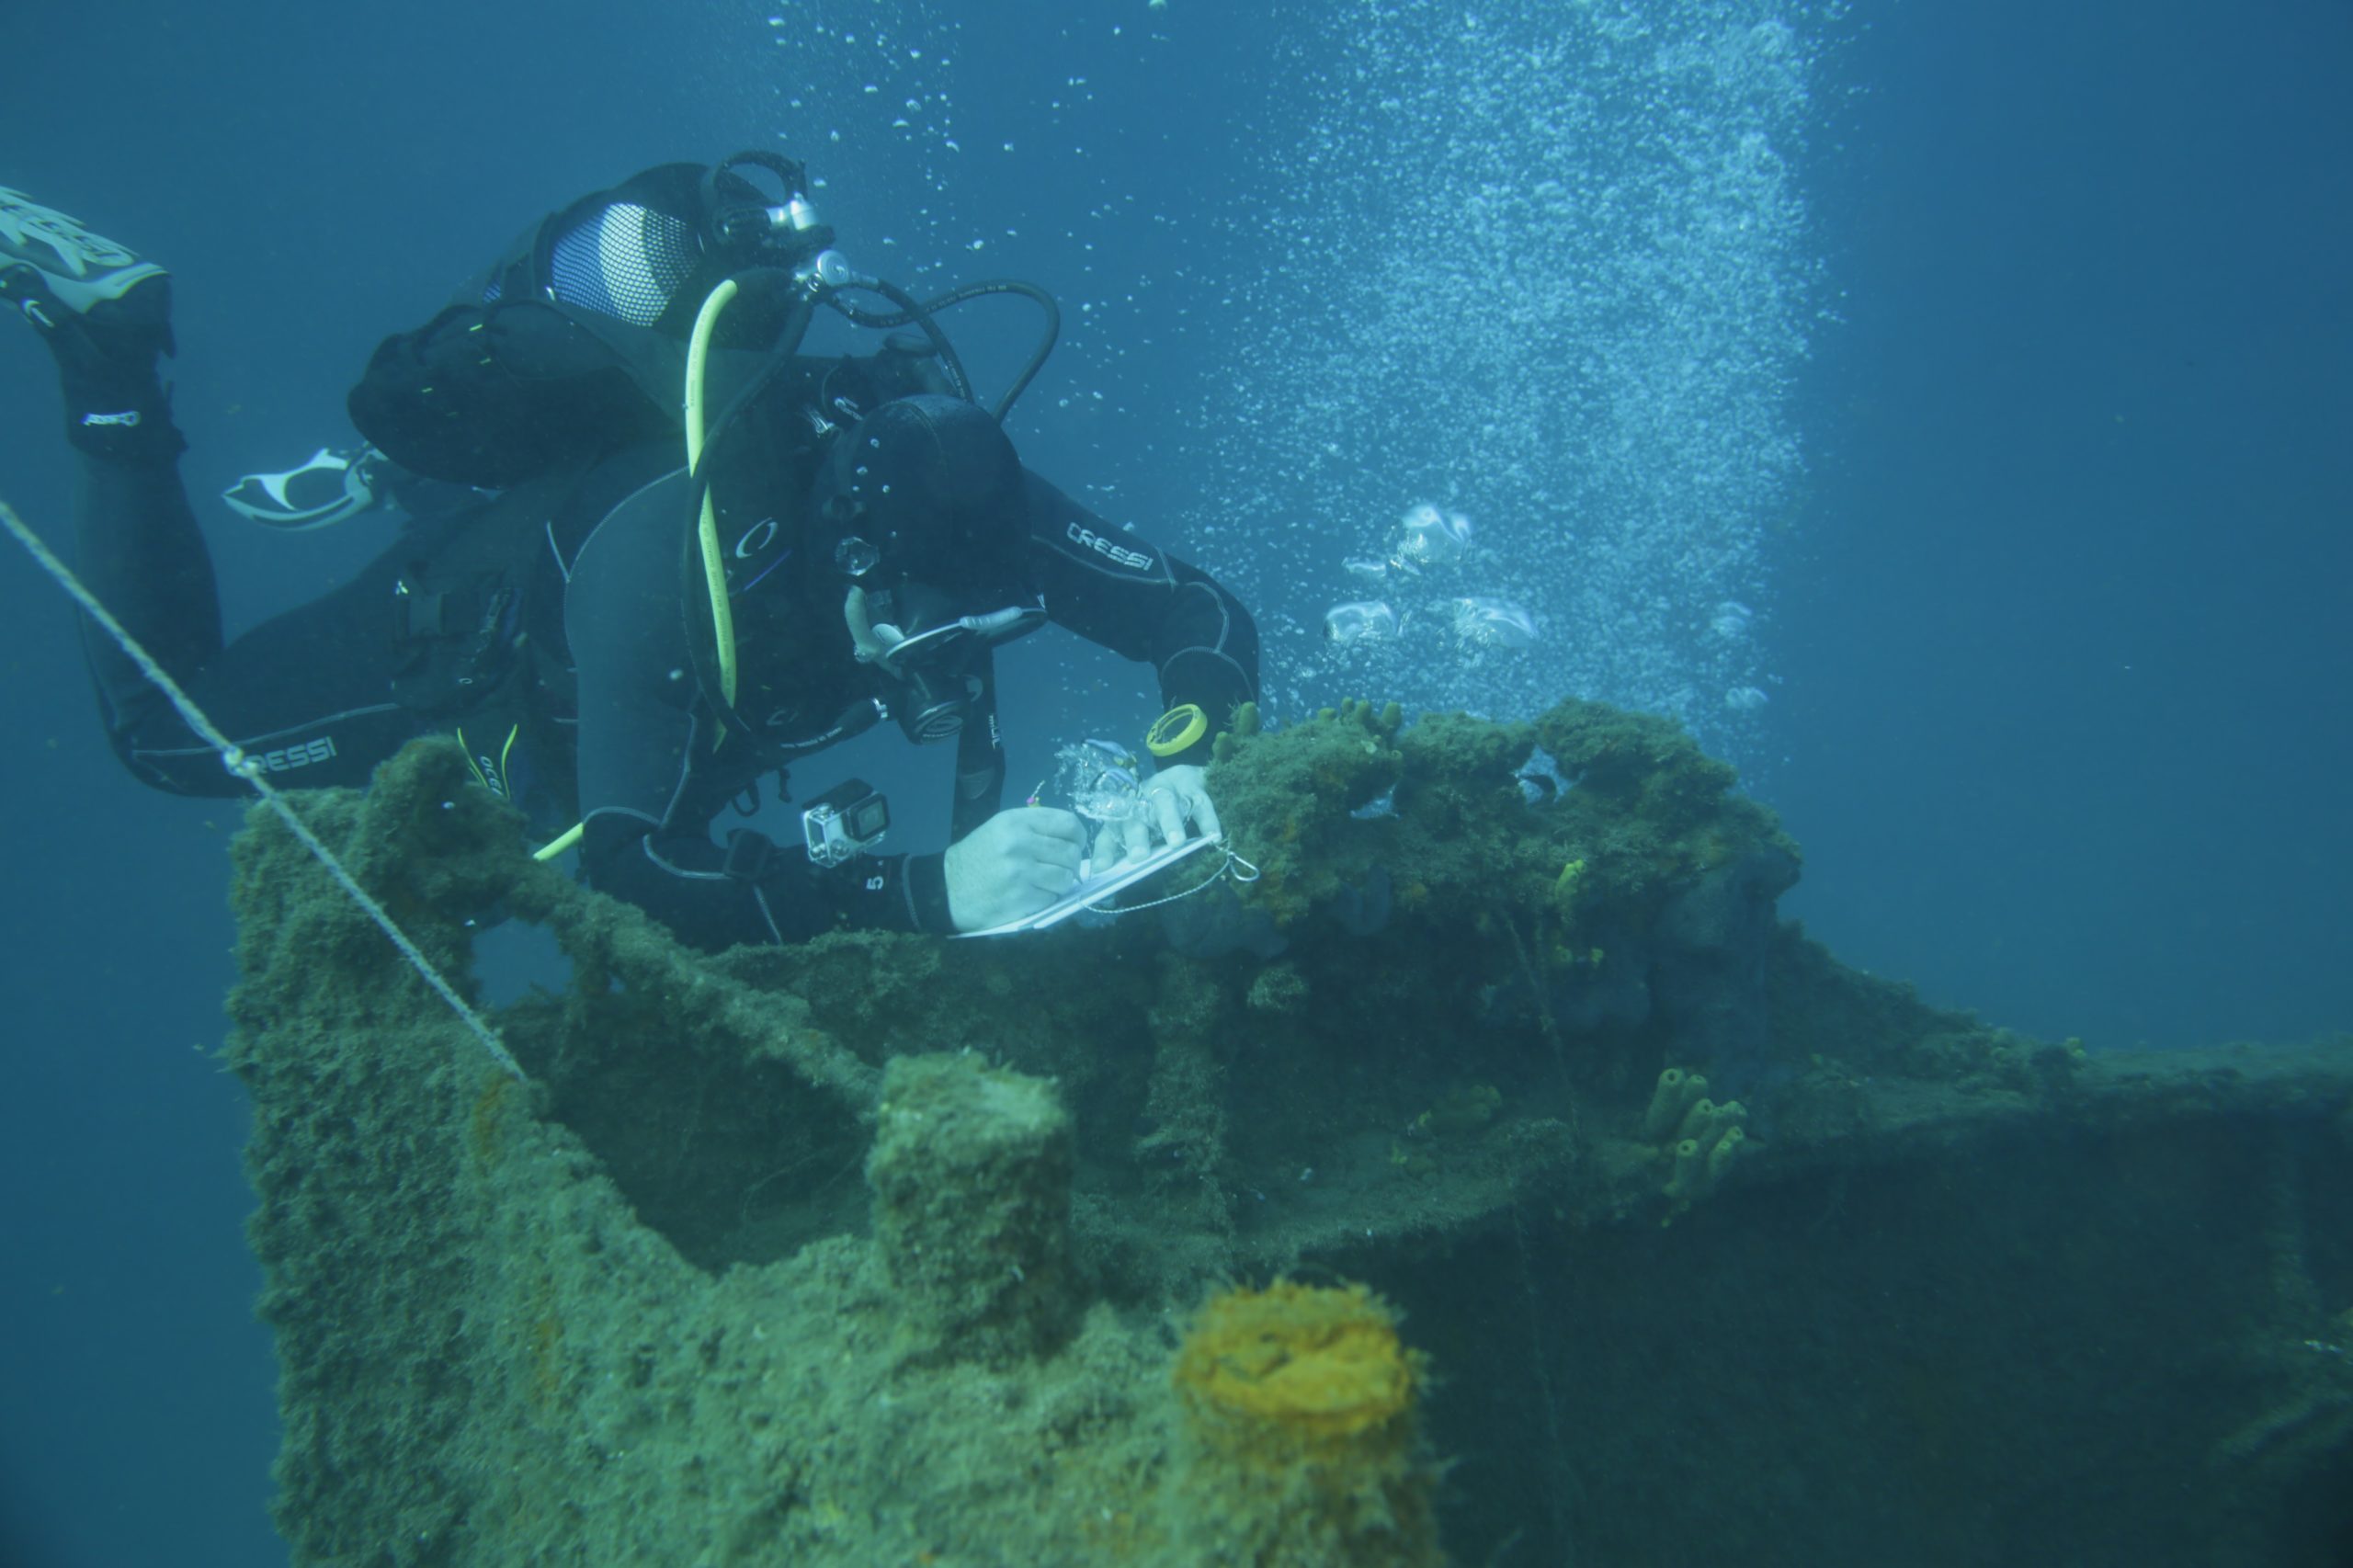 Diving as a Scientist: Training, Recognition, Occupation – The “Science Diver” Project